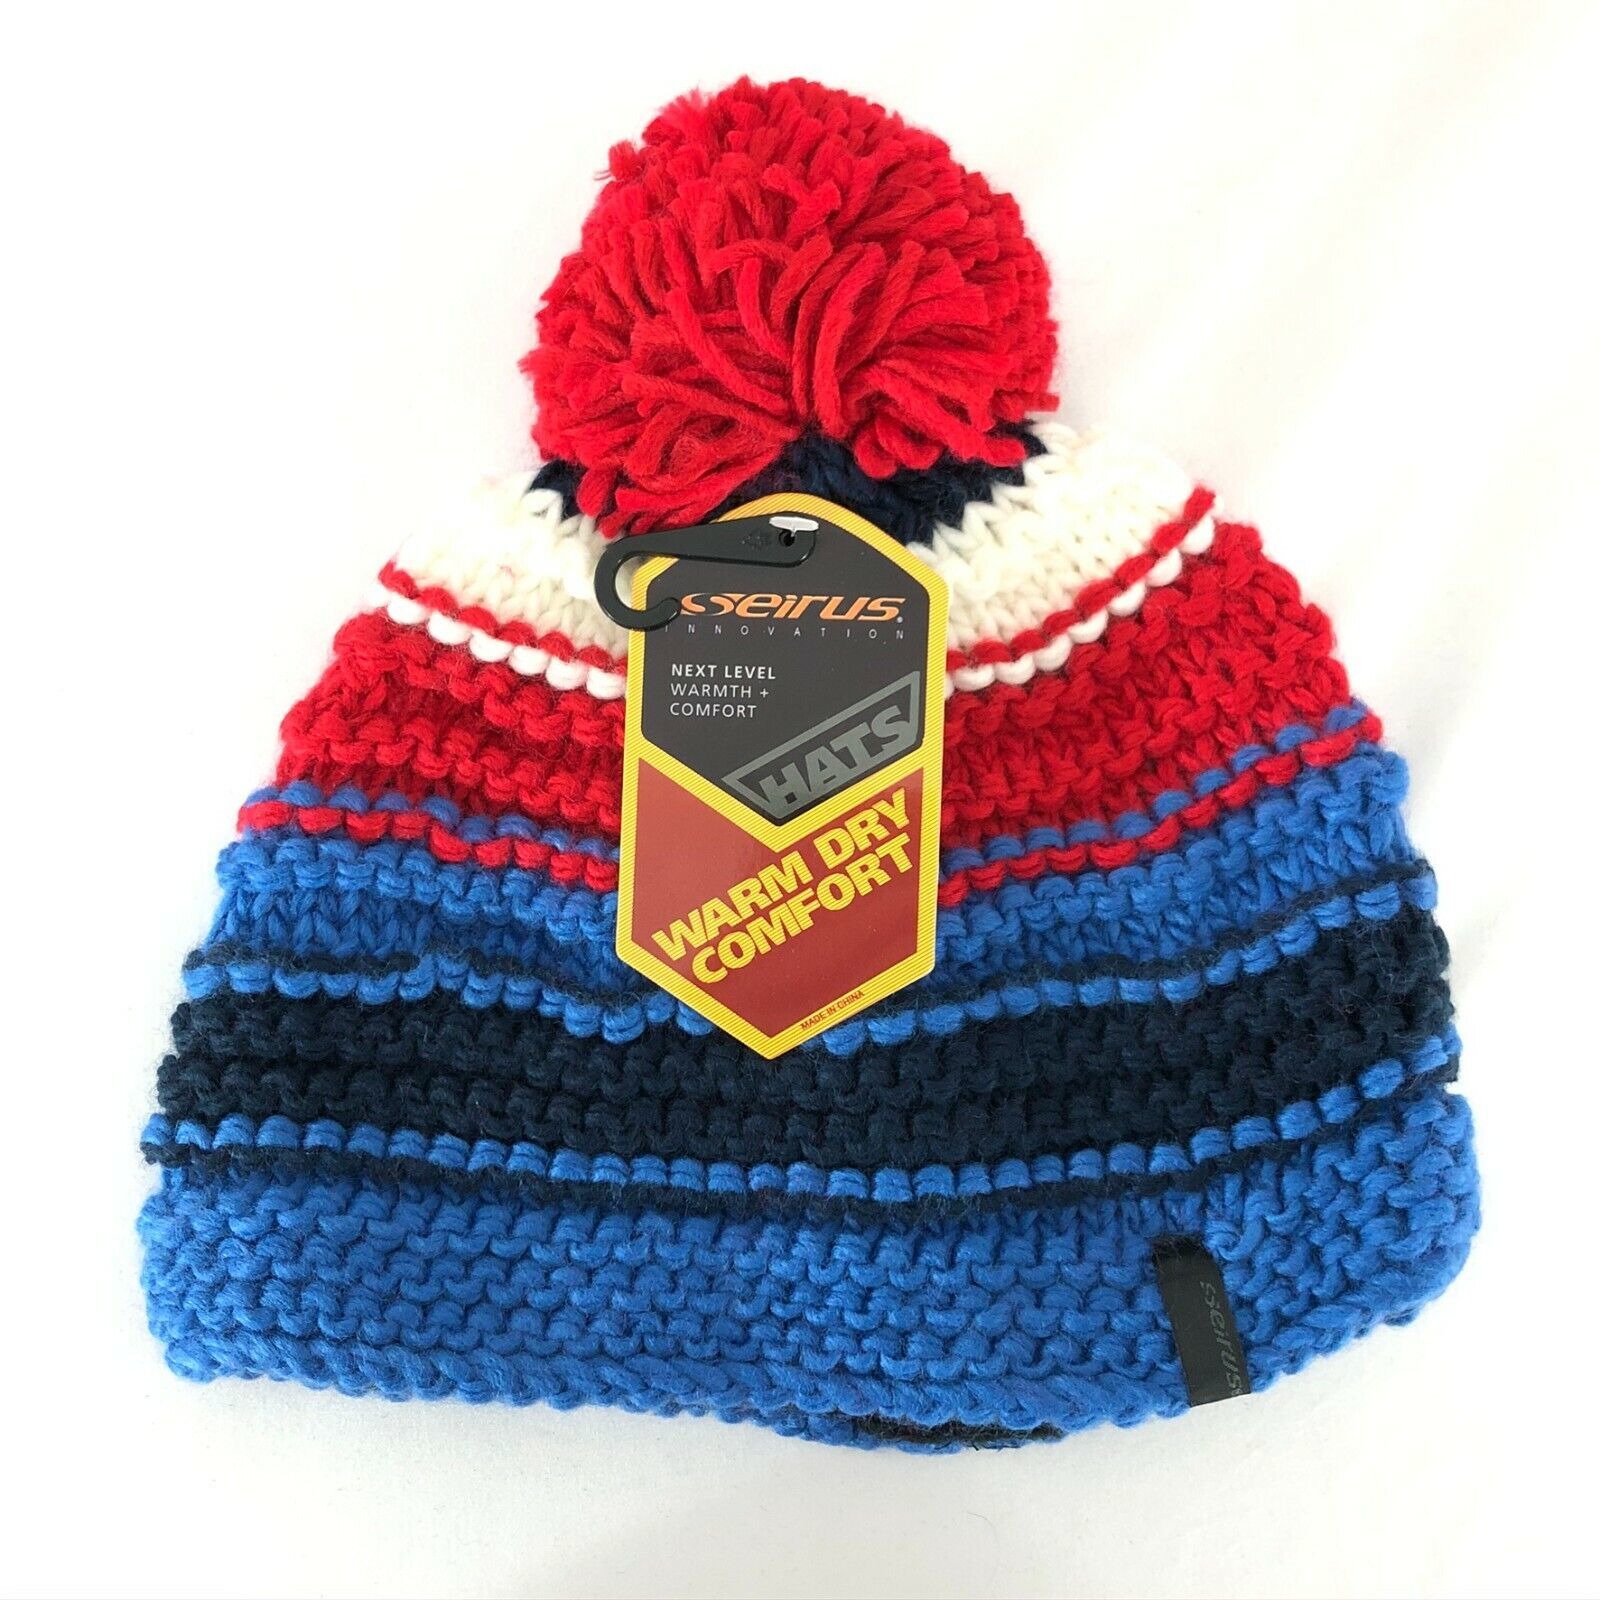 Primary image for Seirus Beanie Hat Knit Pom Striped Warm Dry Comfort Red White Blue One Size